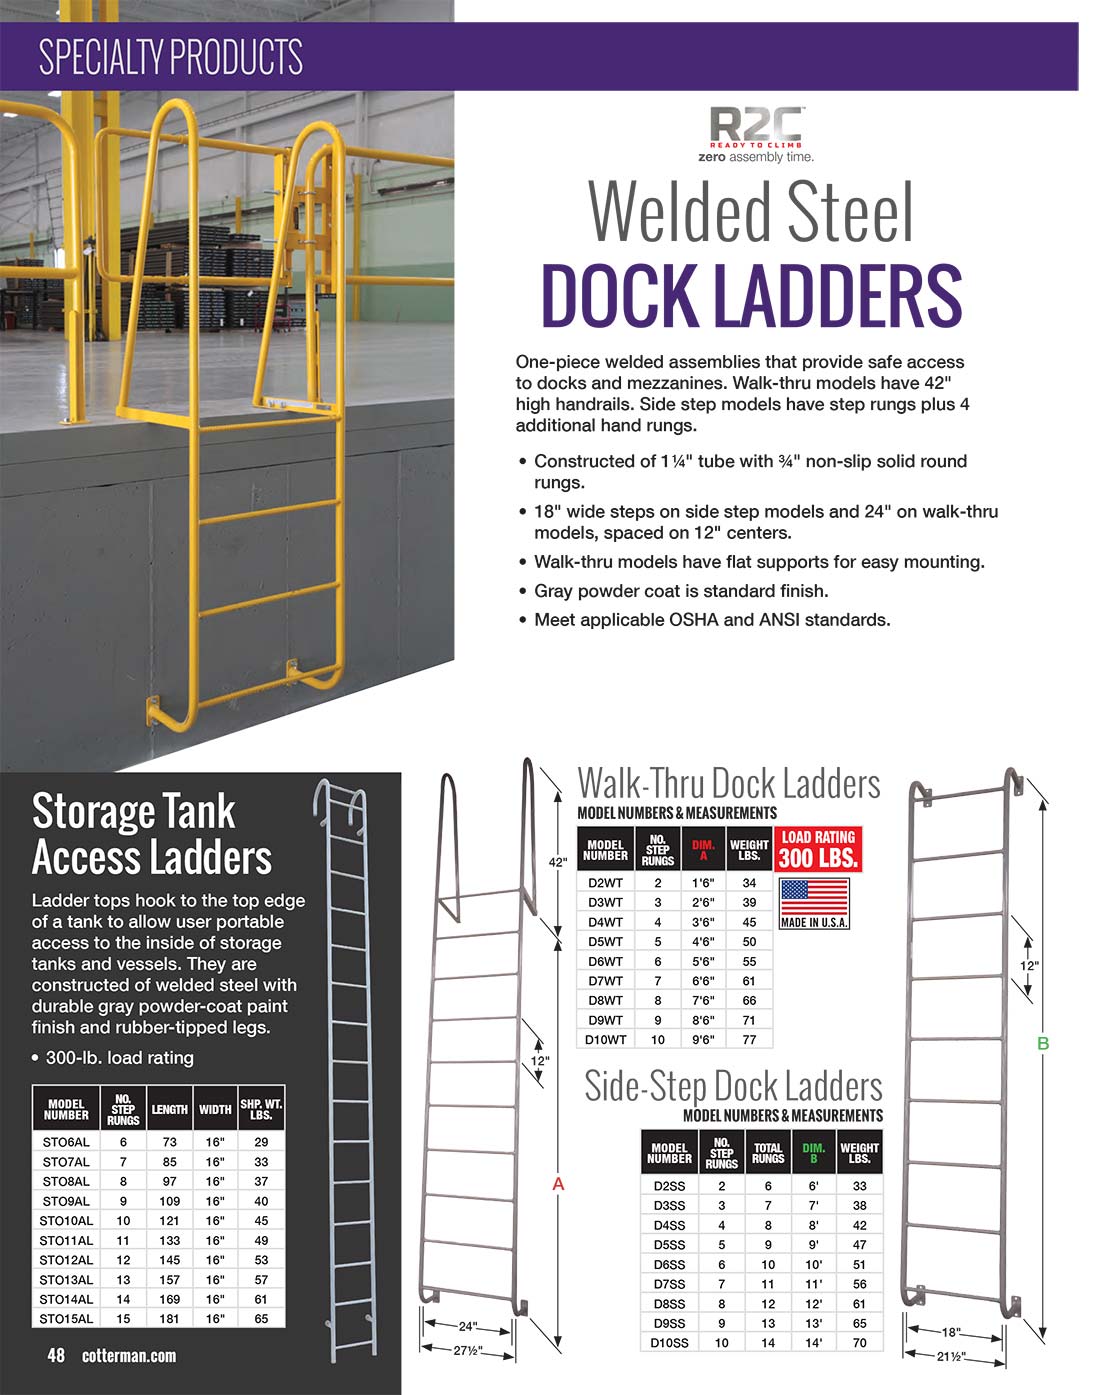 Cotterman Dock Ladders file & Product Information 